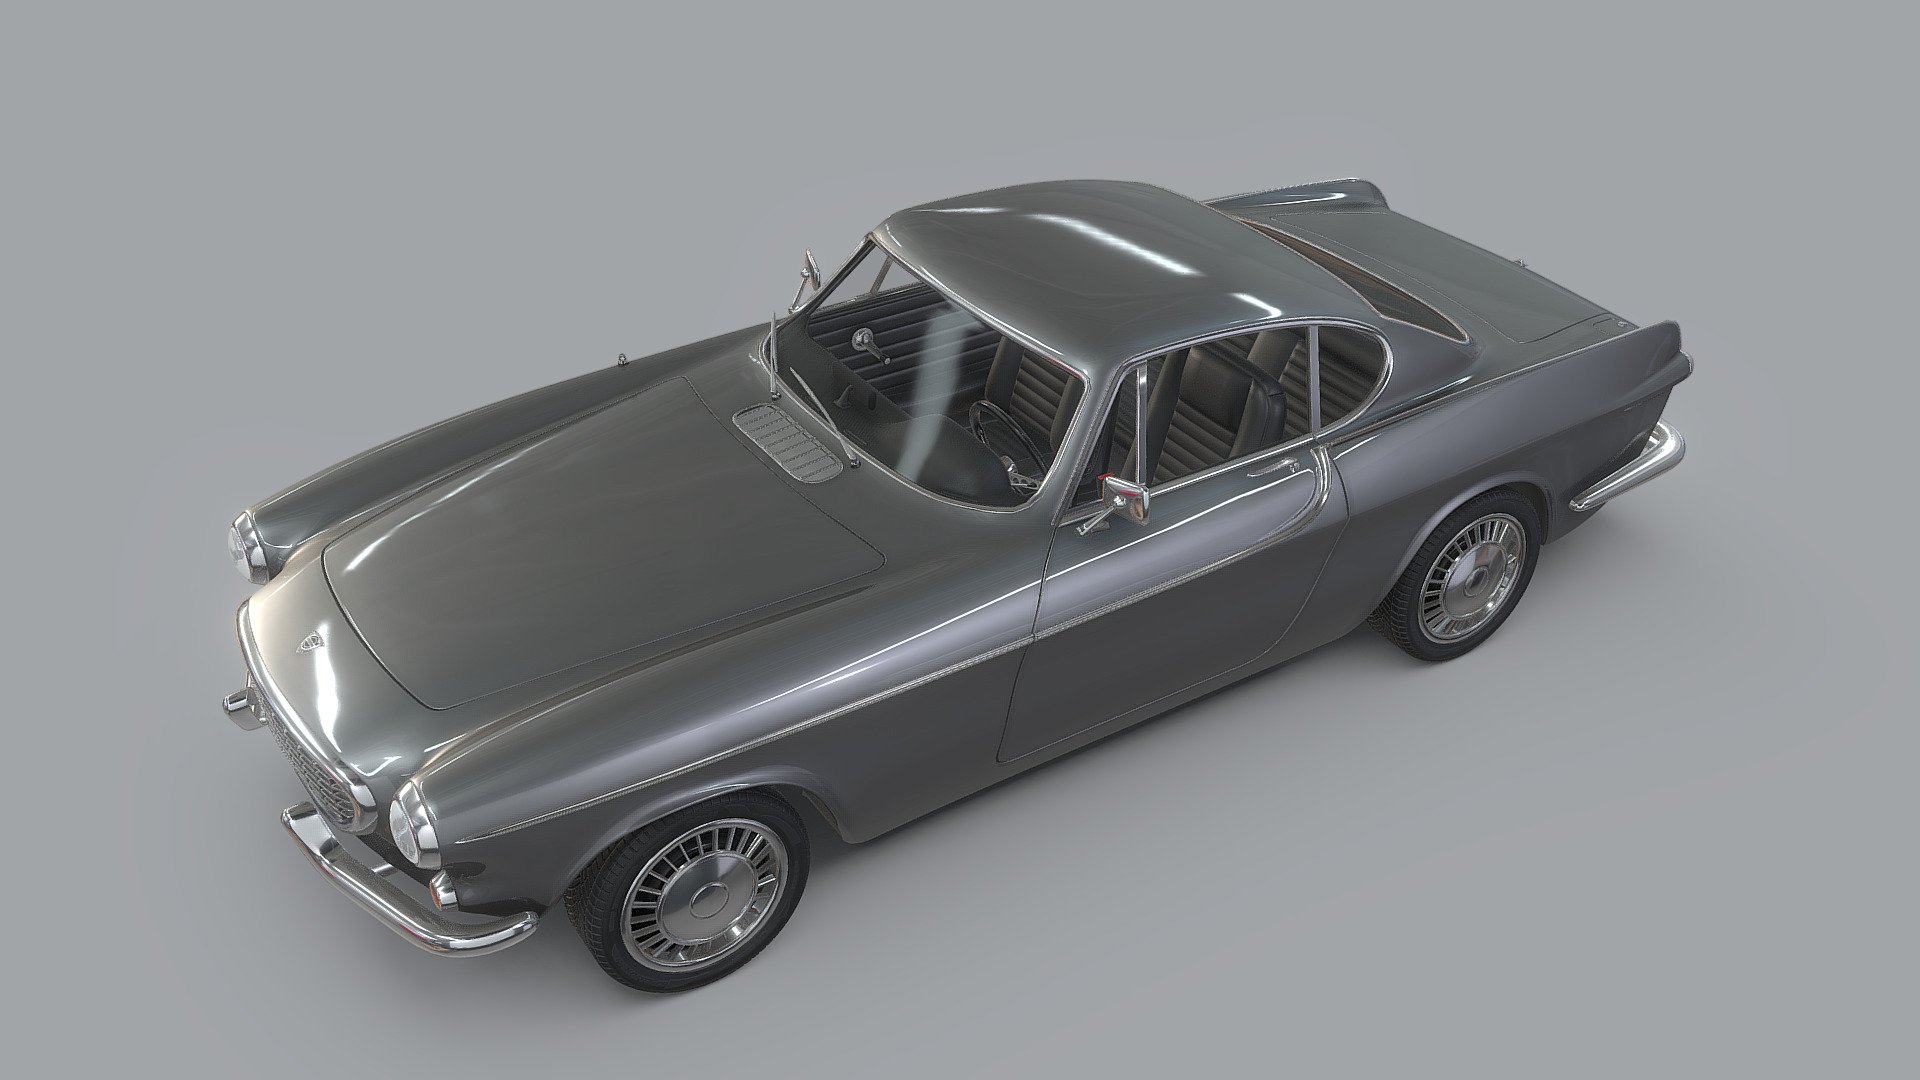 I initially modeled a high poly version of this car for a contest but didn't participate in the end so I decided to make a real-time version of it. It is not super optimized but should be good running on the web 3d model